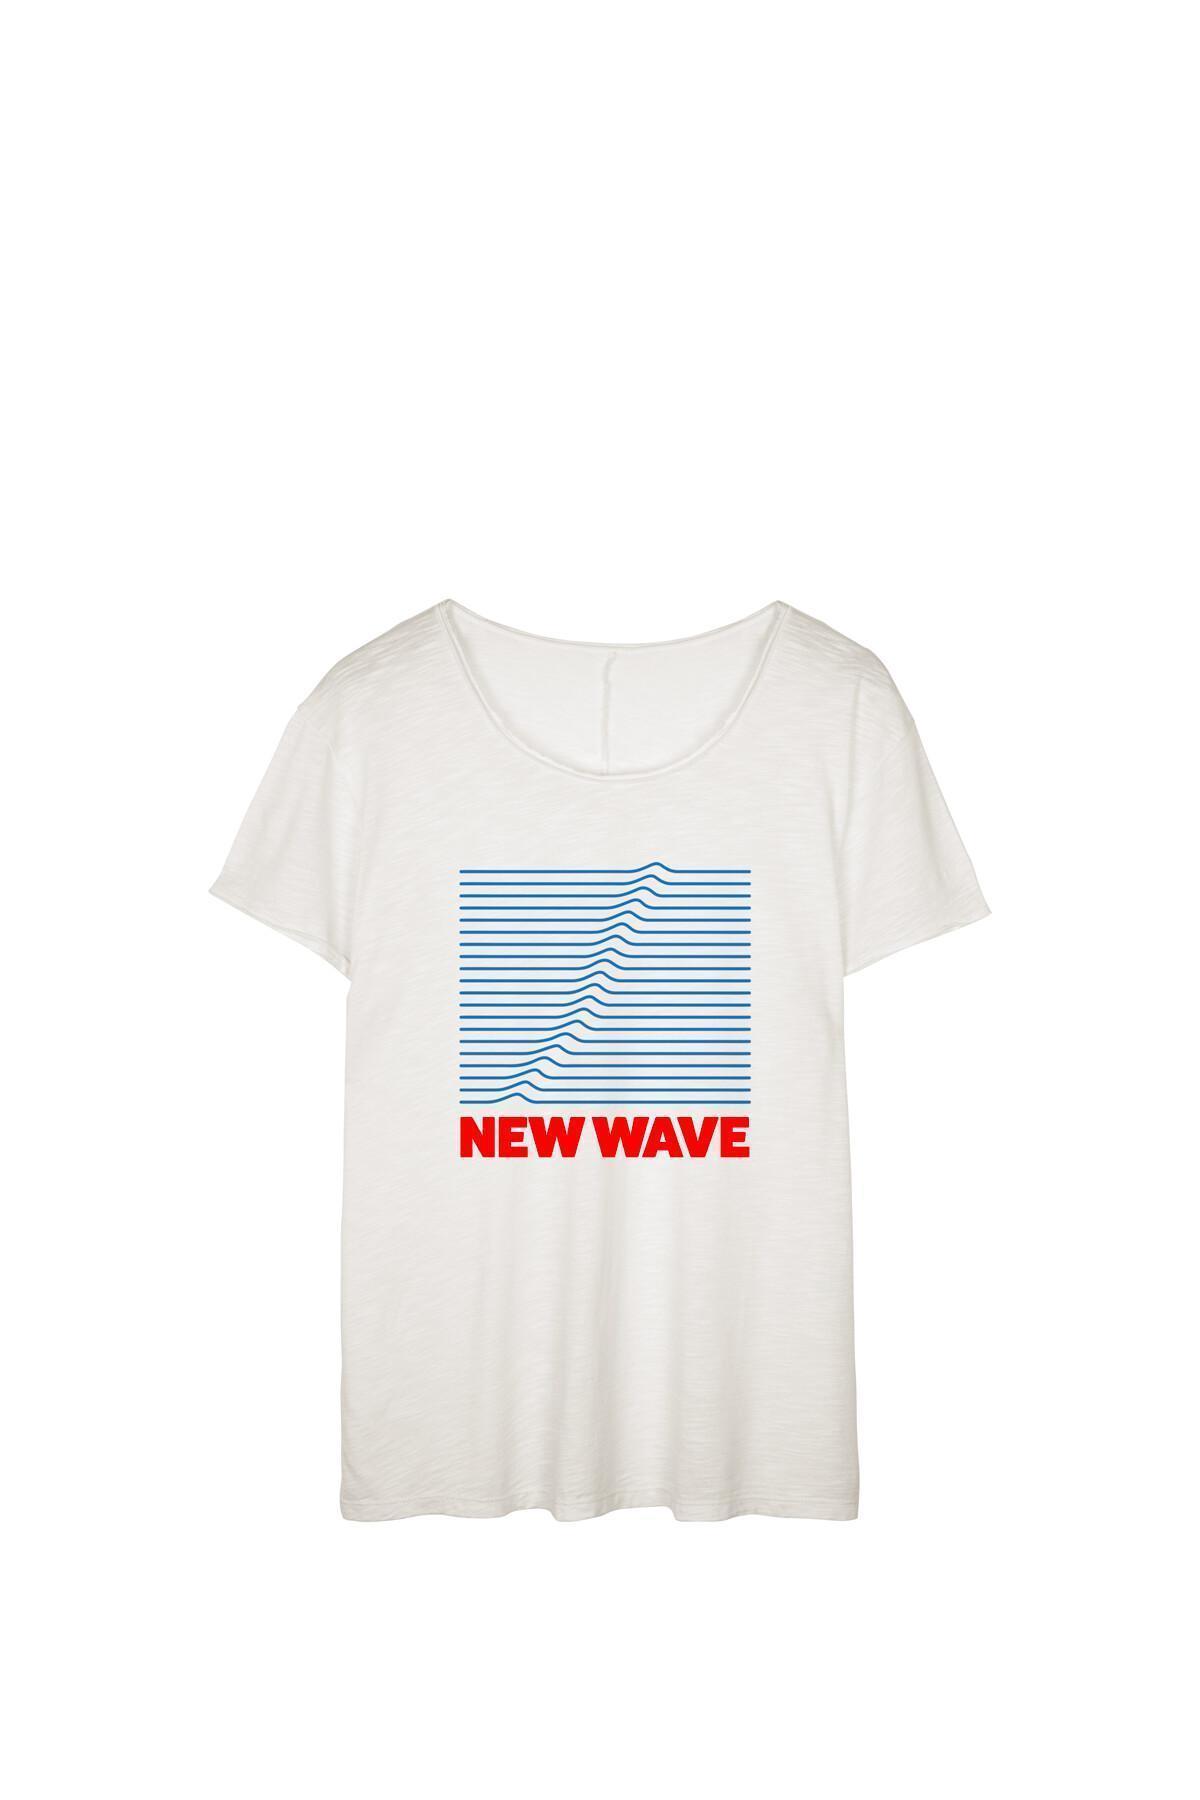 T-shirt French Disorder New Wave